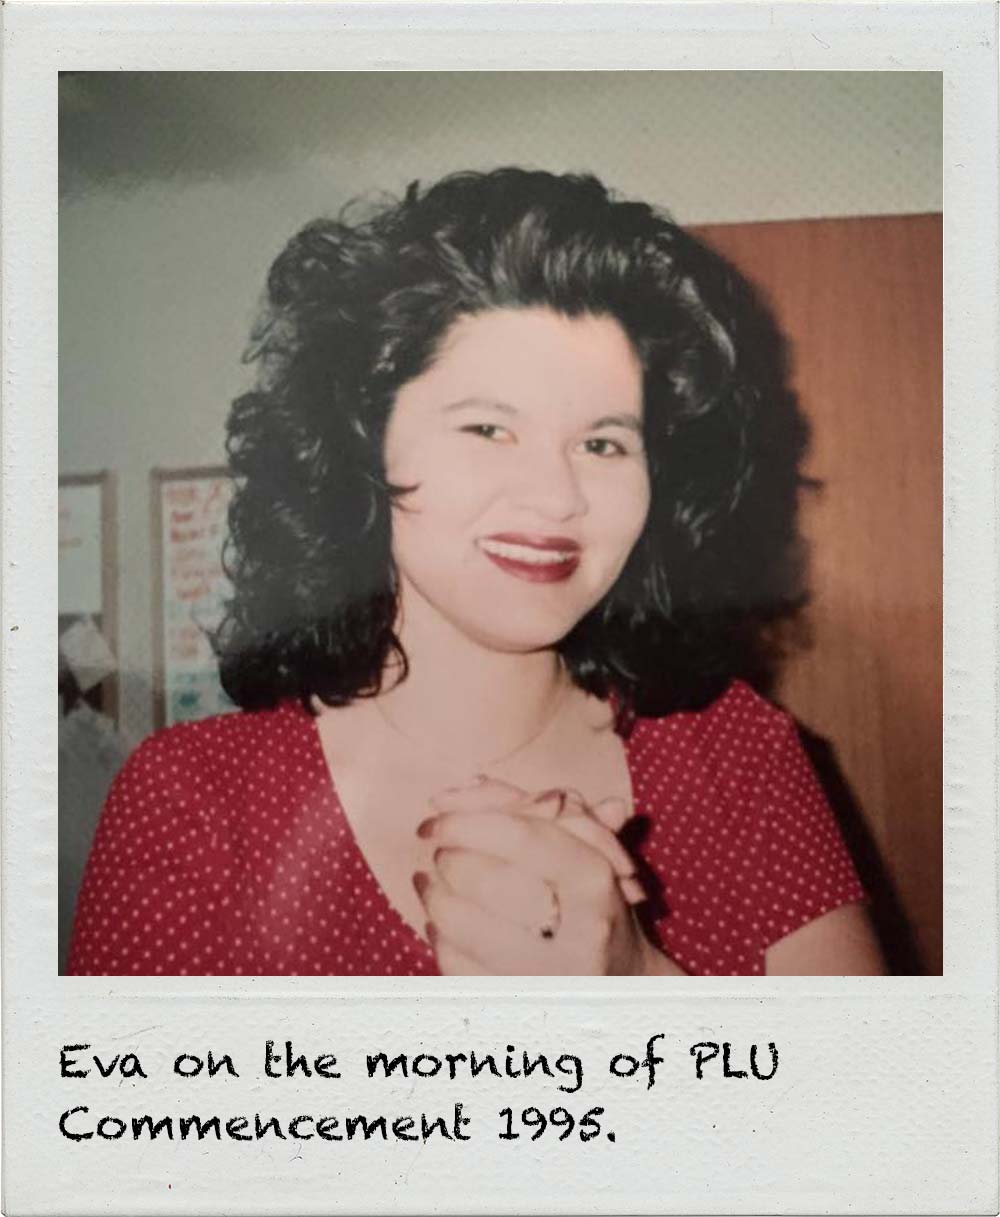 Eva on the morning of PLU Commencement 1995.